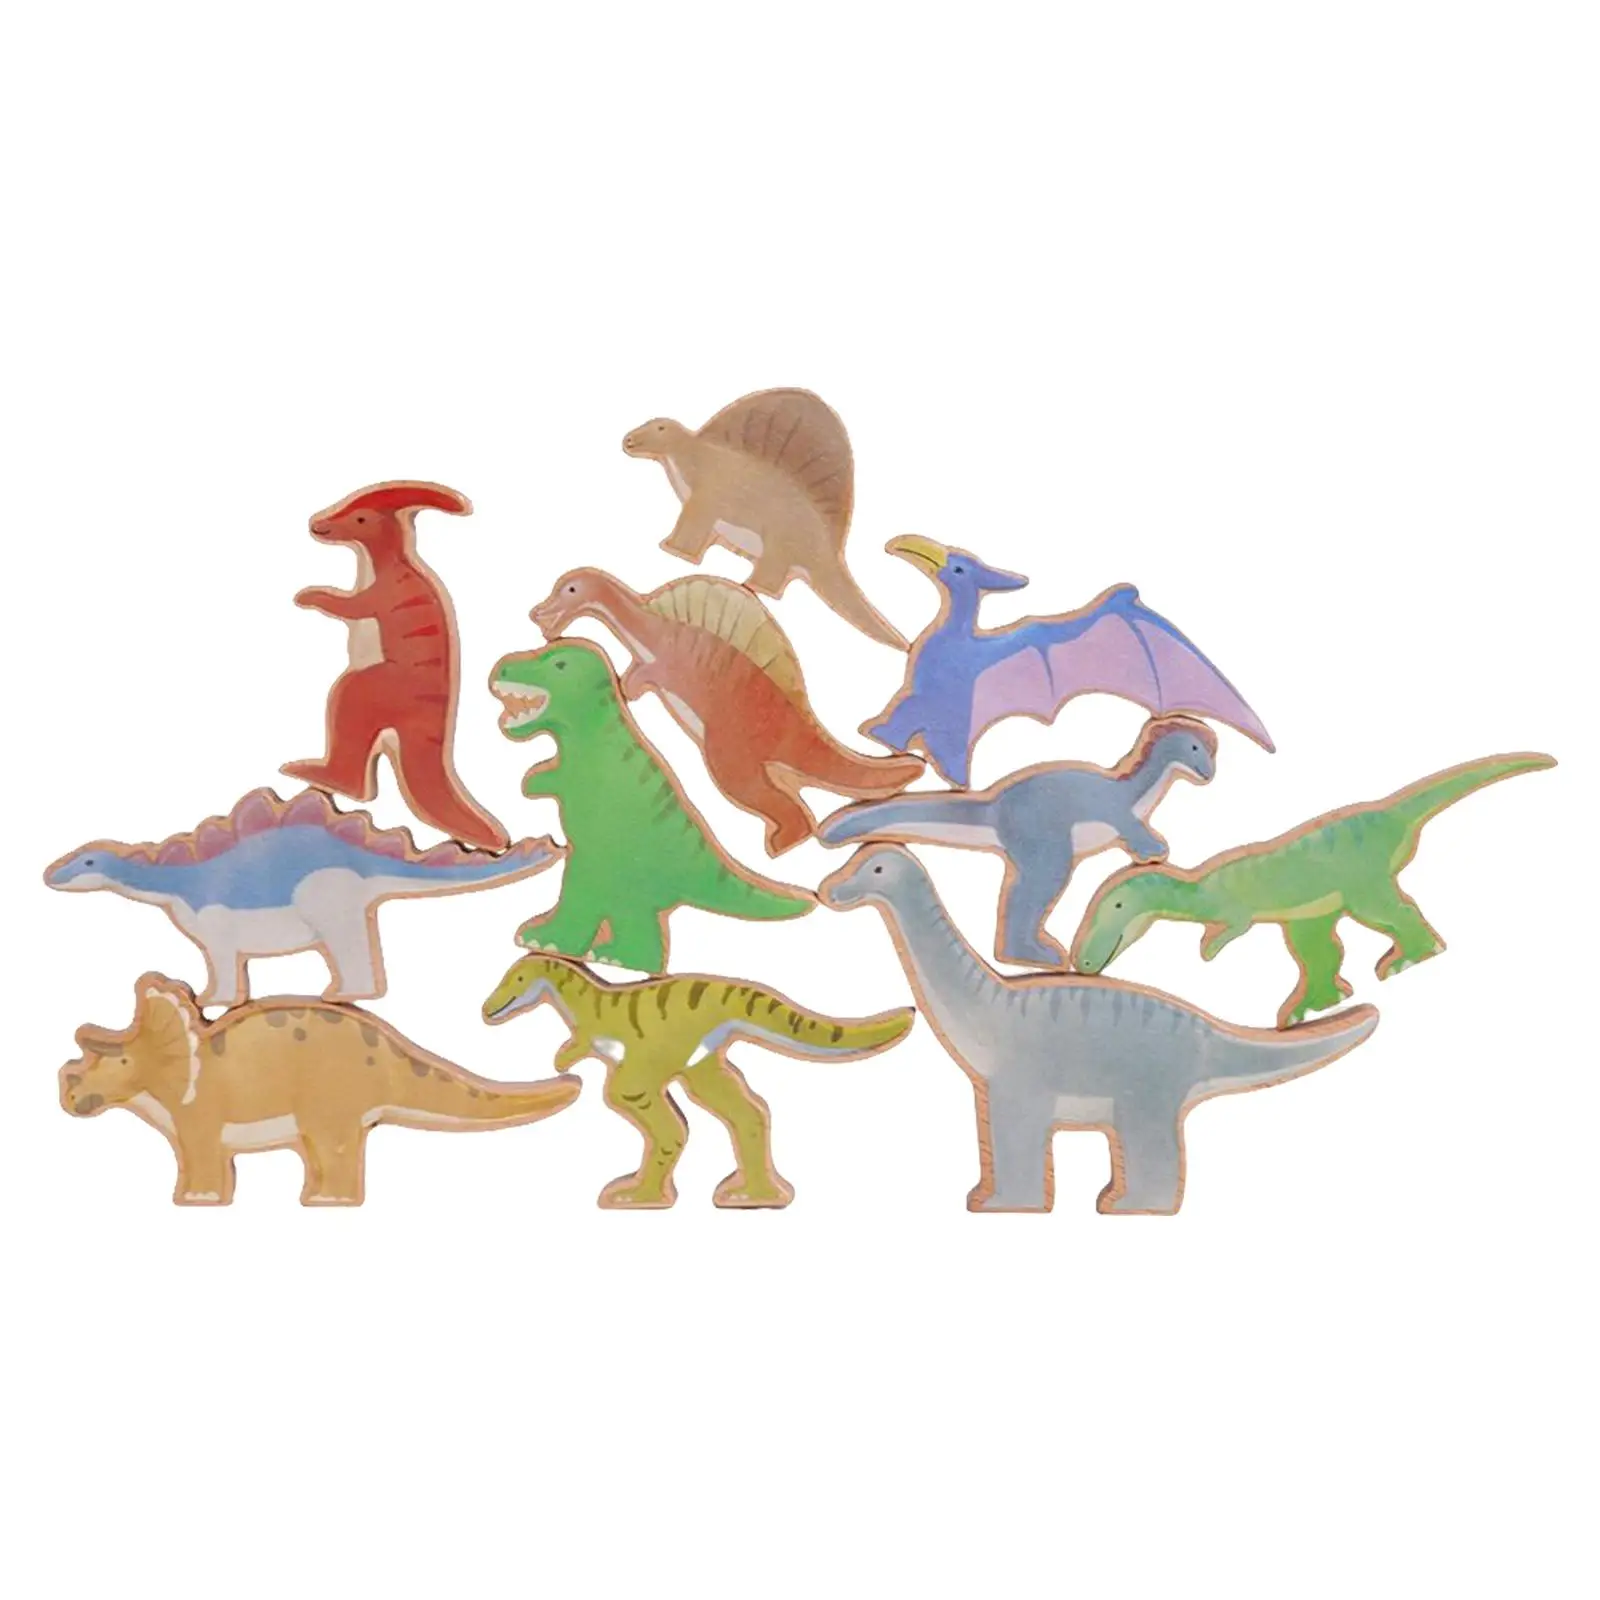 Montessori Wood Dinosaurs Balance Game Learning Building Toys Puzzle Toys Funny for Girls Boys Toddler Children Birthday Gifts